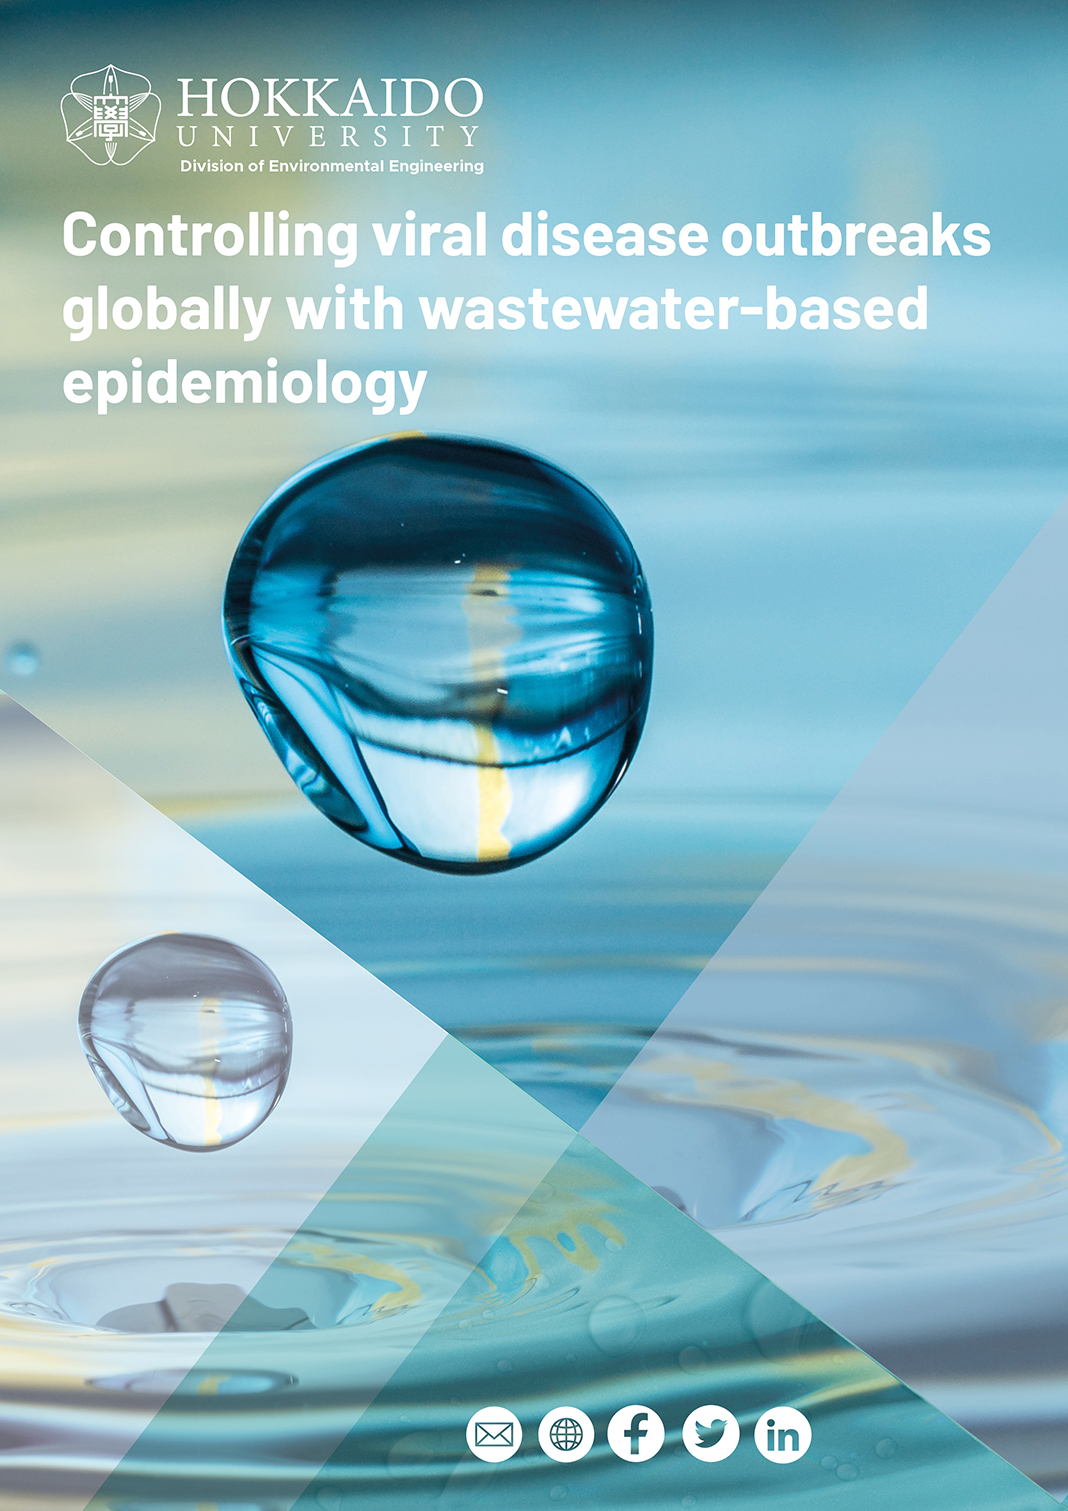 Controlling viral disease outbreaks with wastewater-based epidemiology